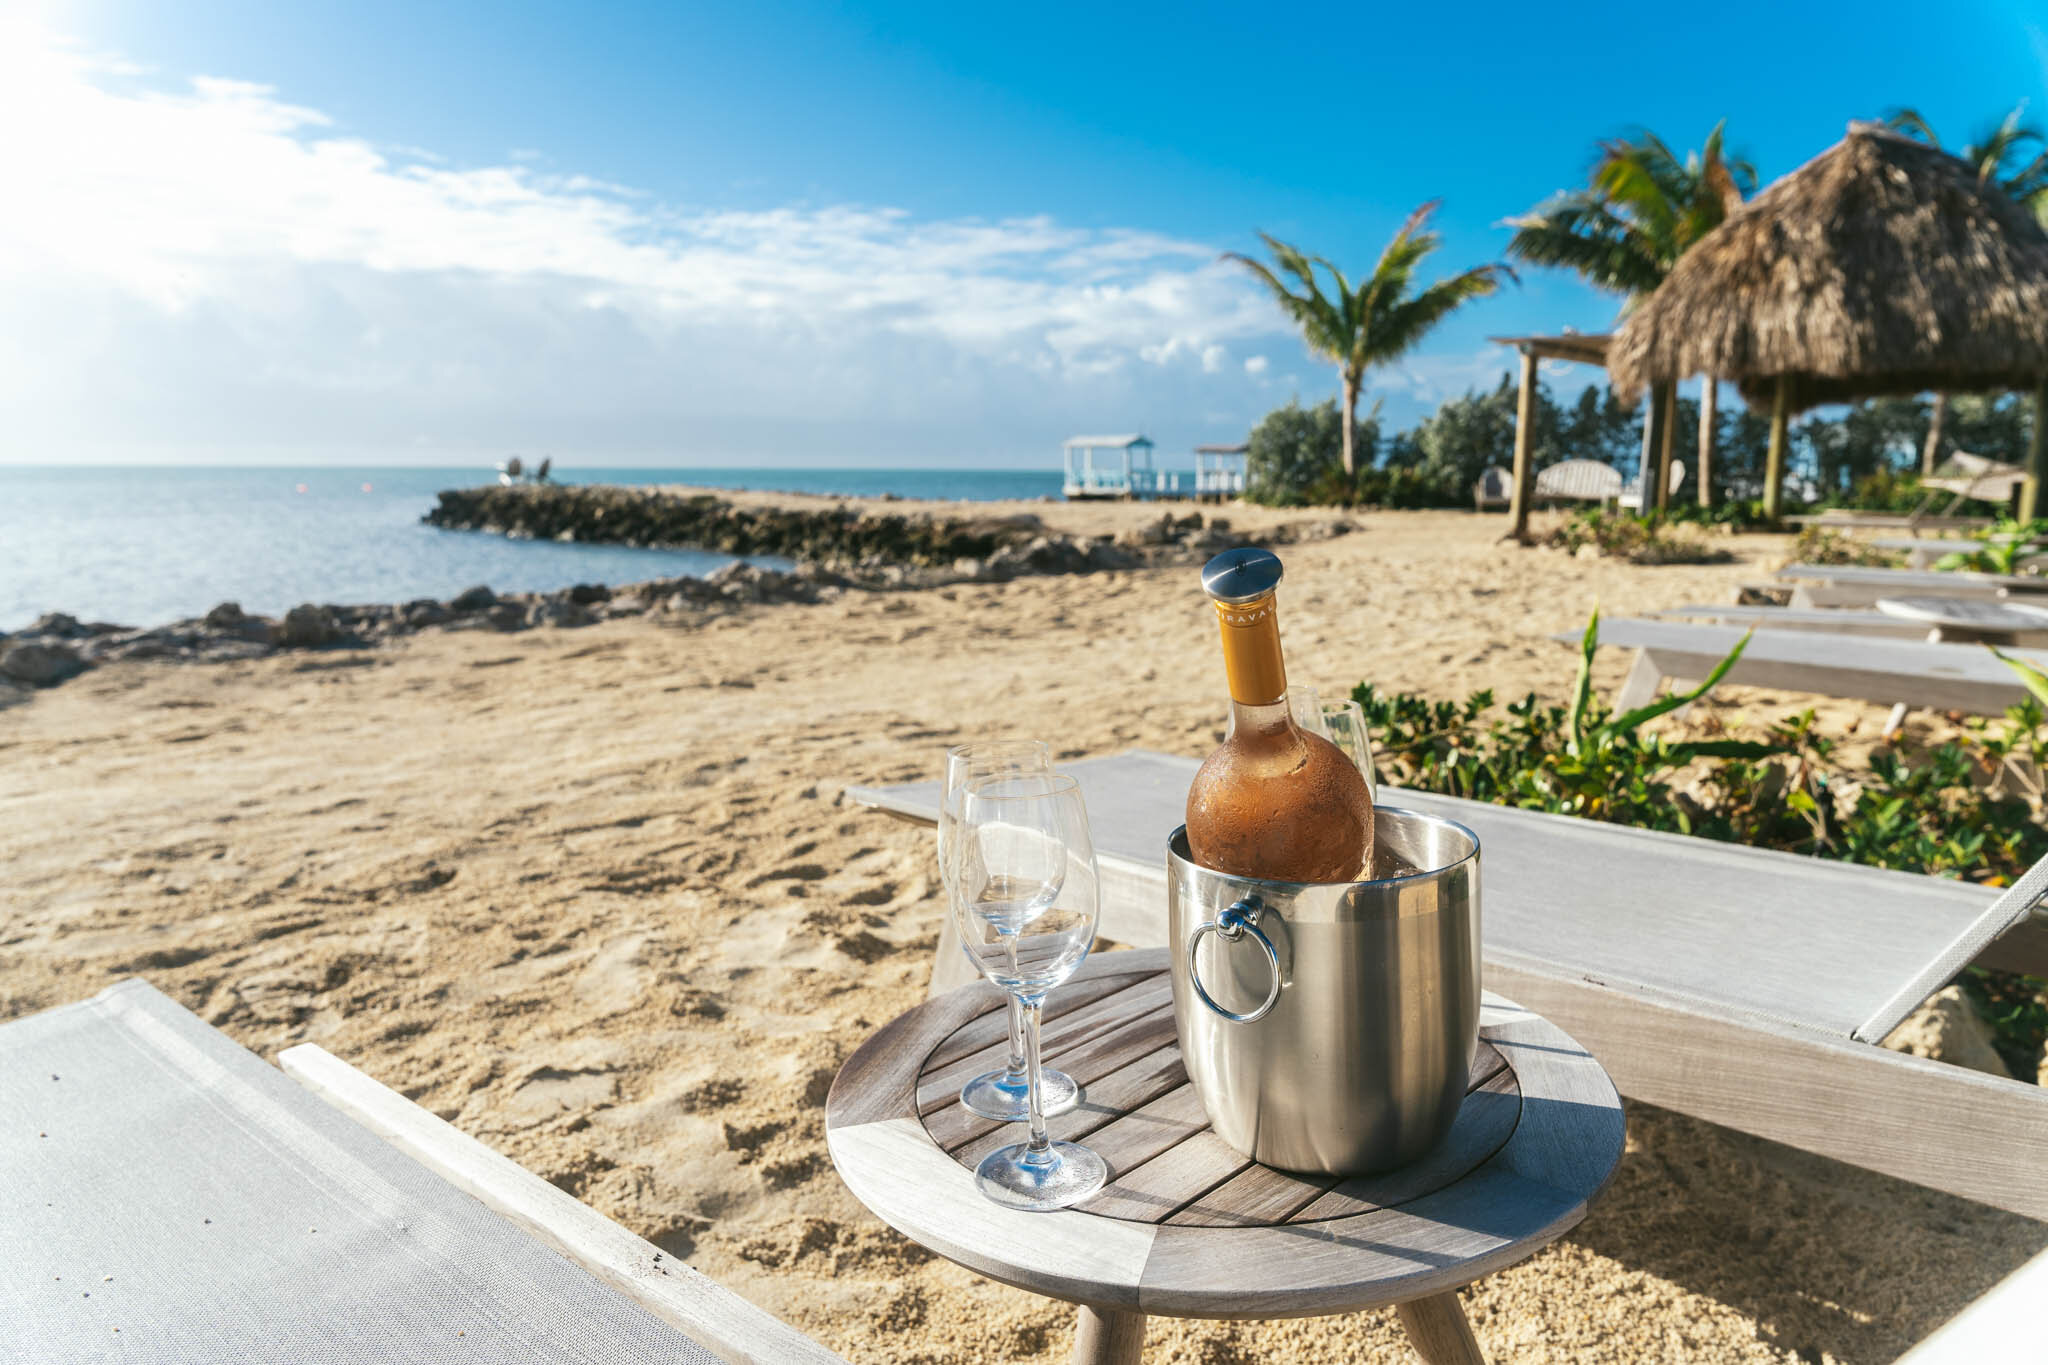  Bottle Of Wine In An Ice Bucket With Two Glasses On A Table Next To Two Lounge Chairs On The Islands Of Islamorada’s Private Beach. 